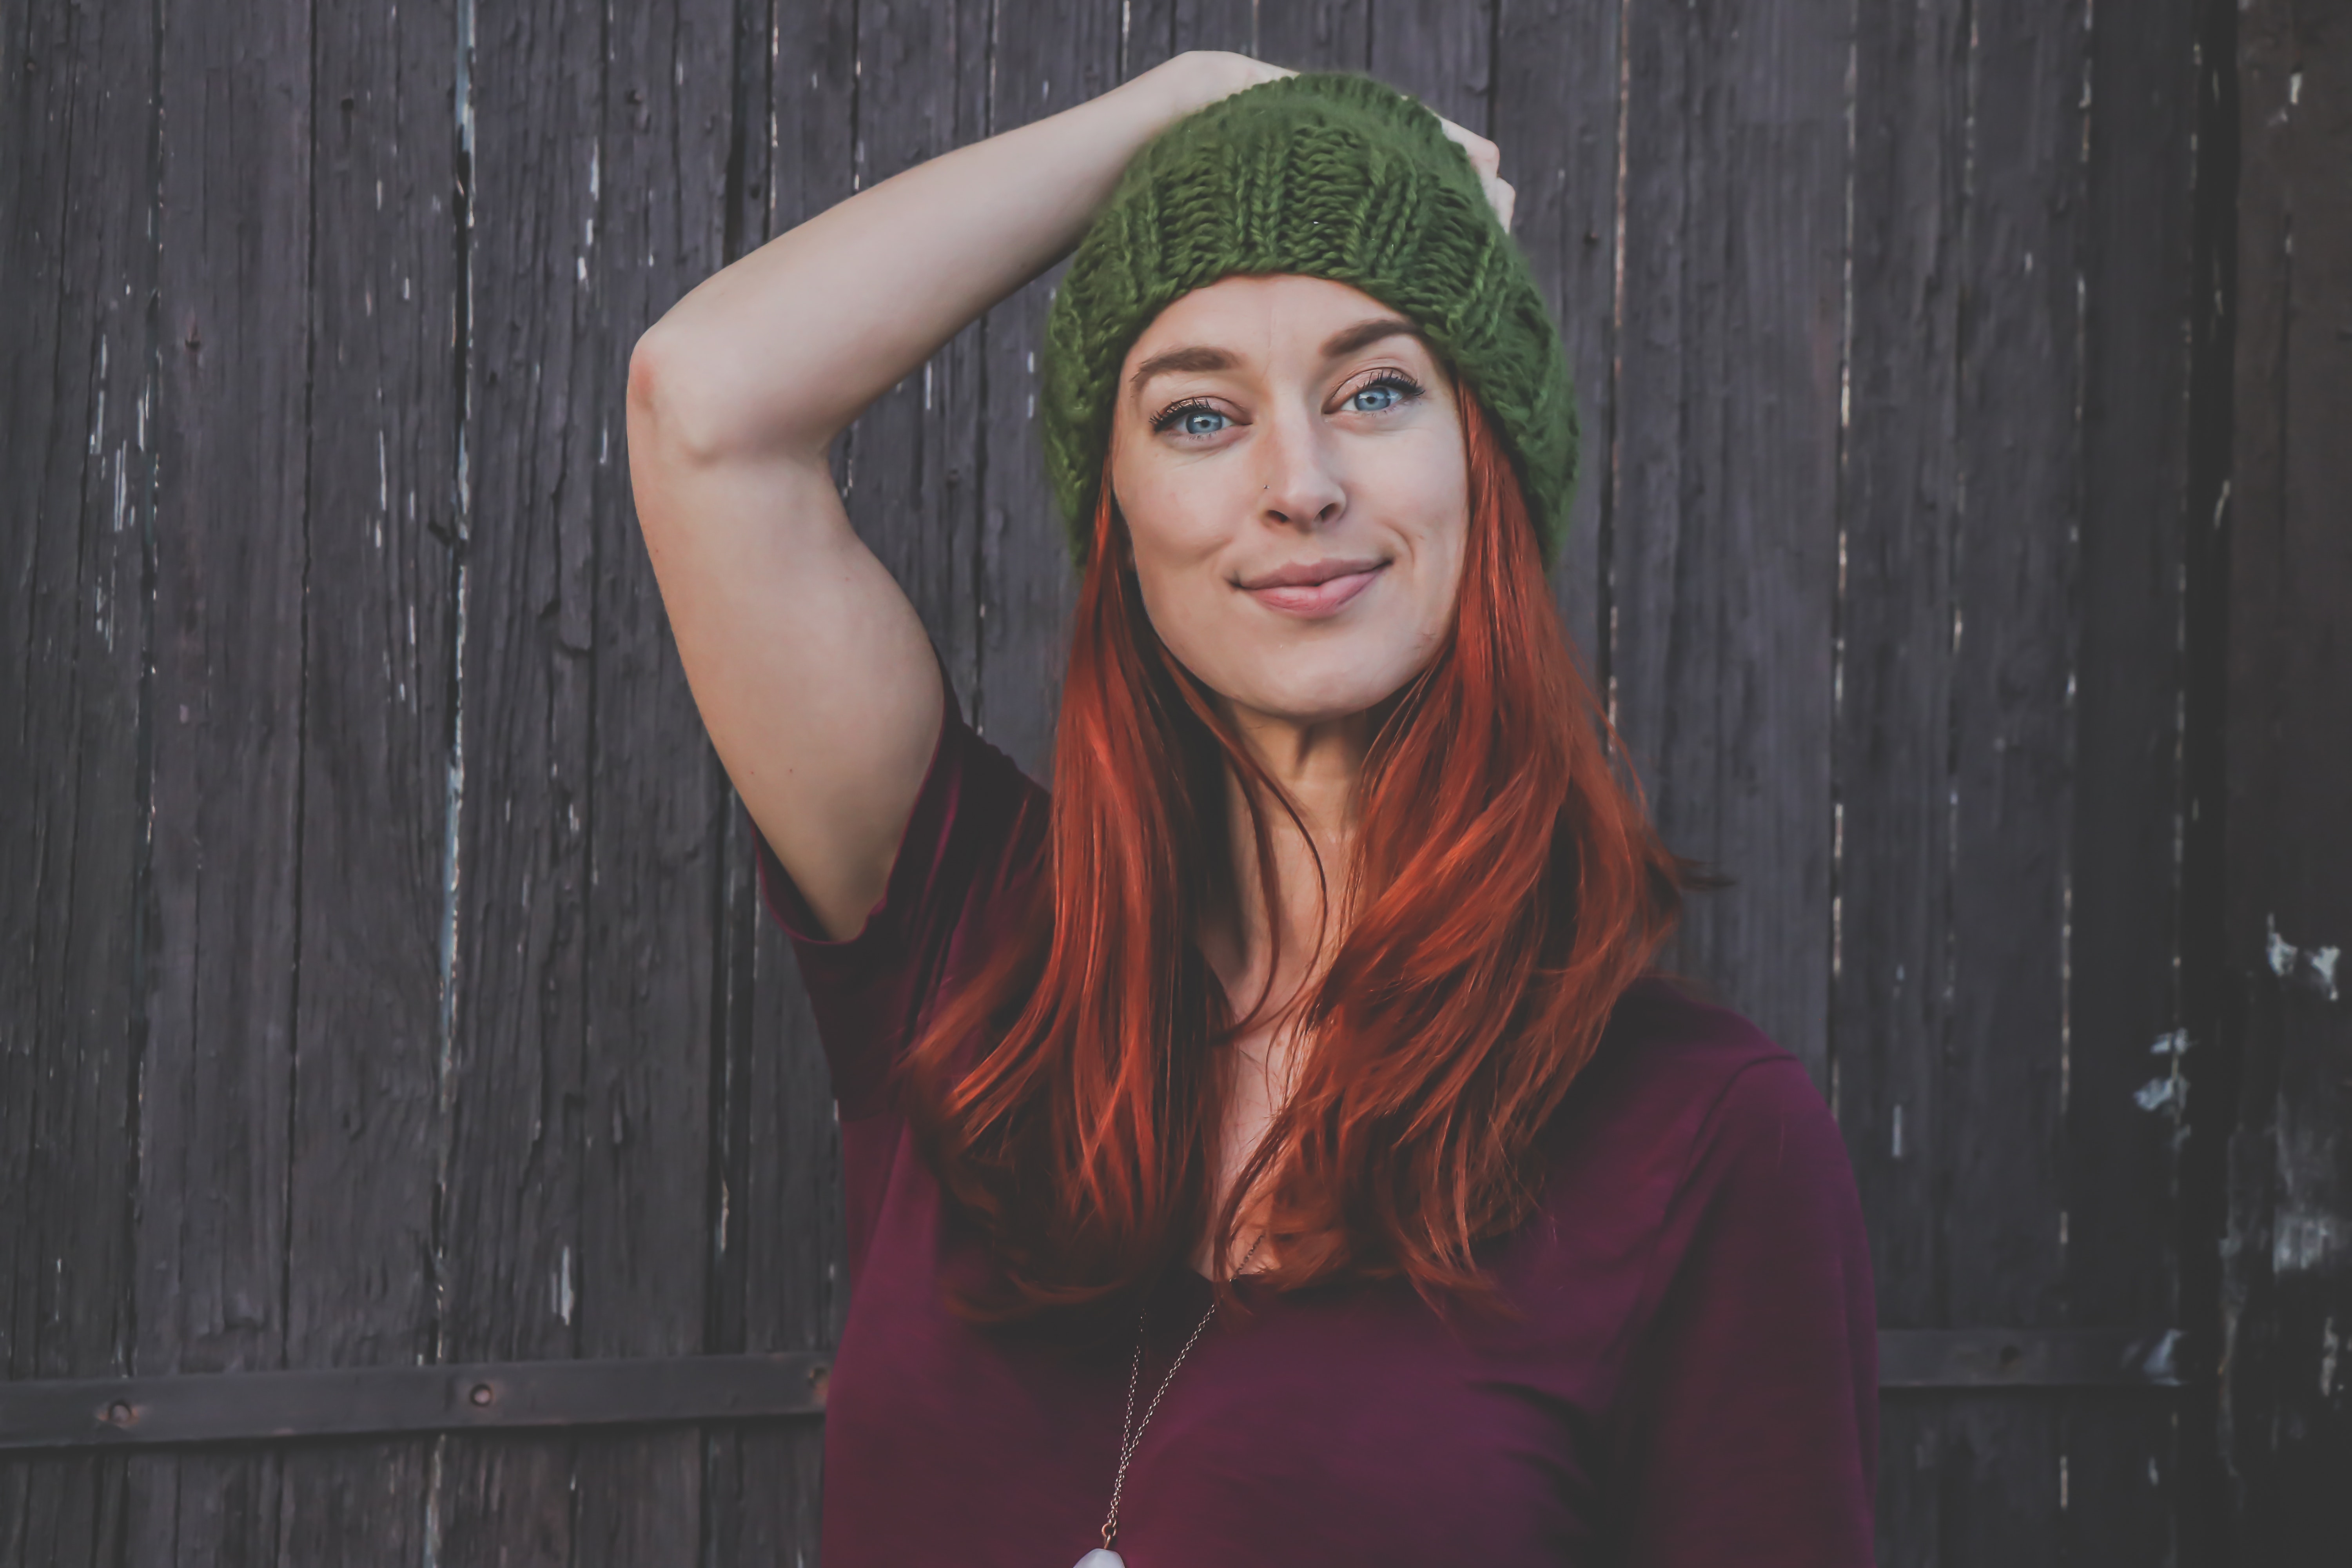 Red haired woman in maroon top wearing green beanie photo